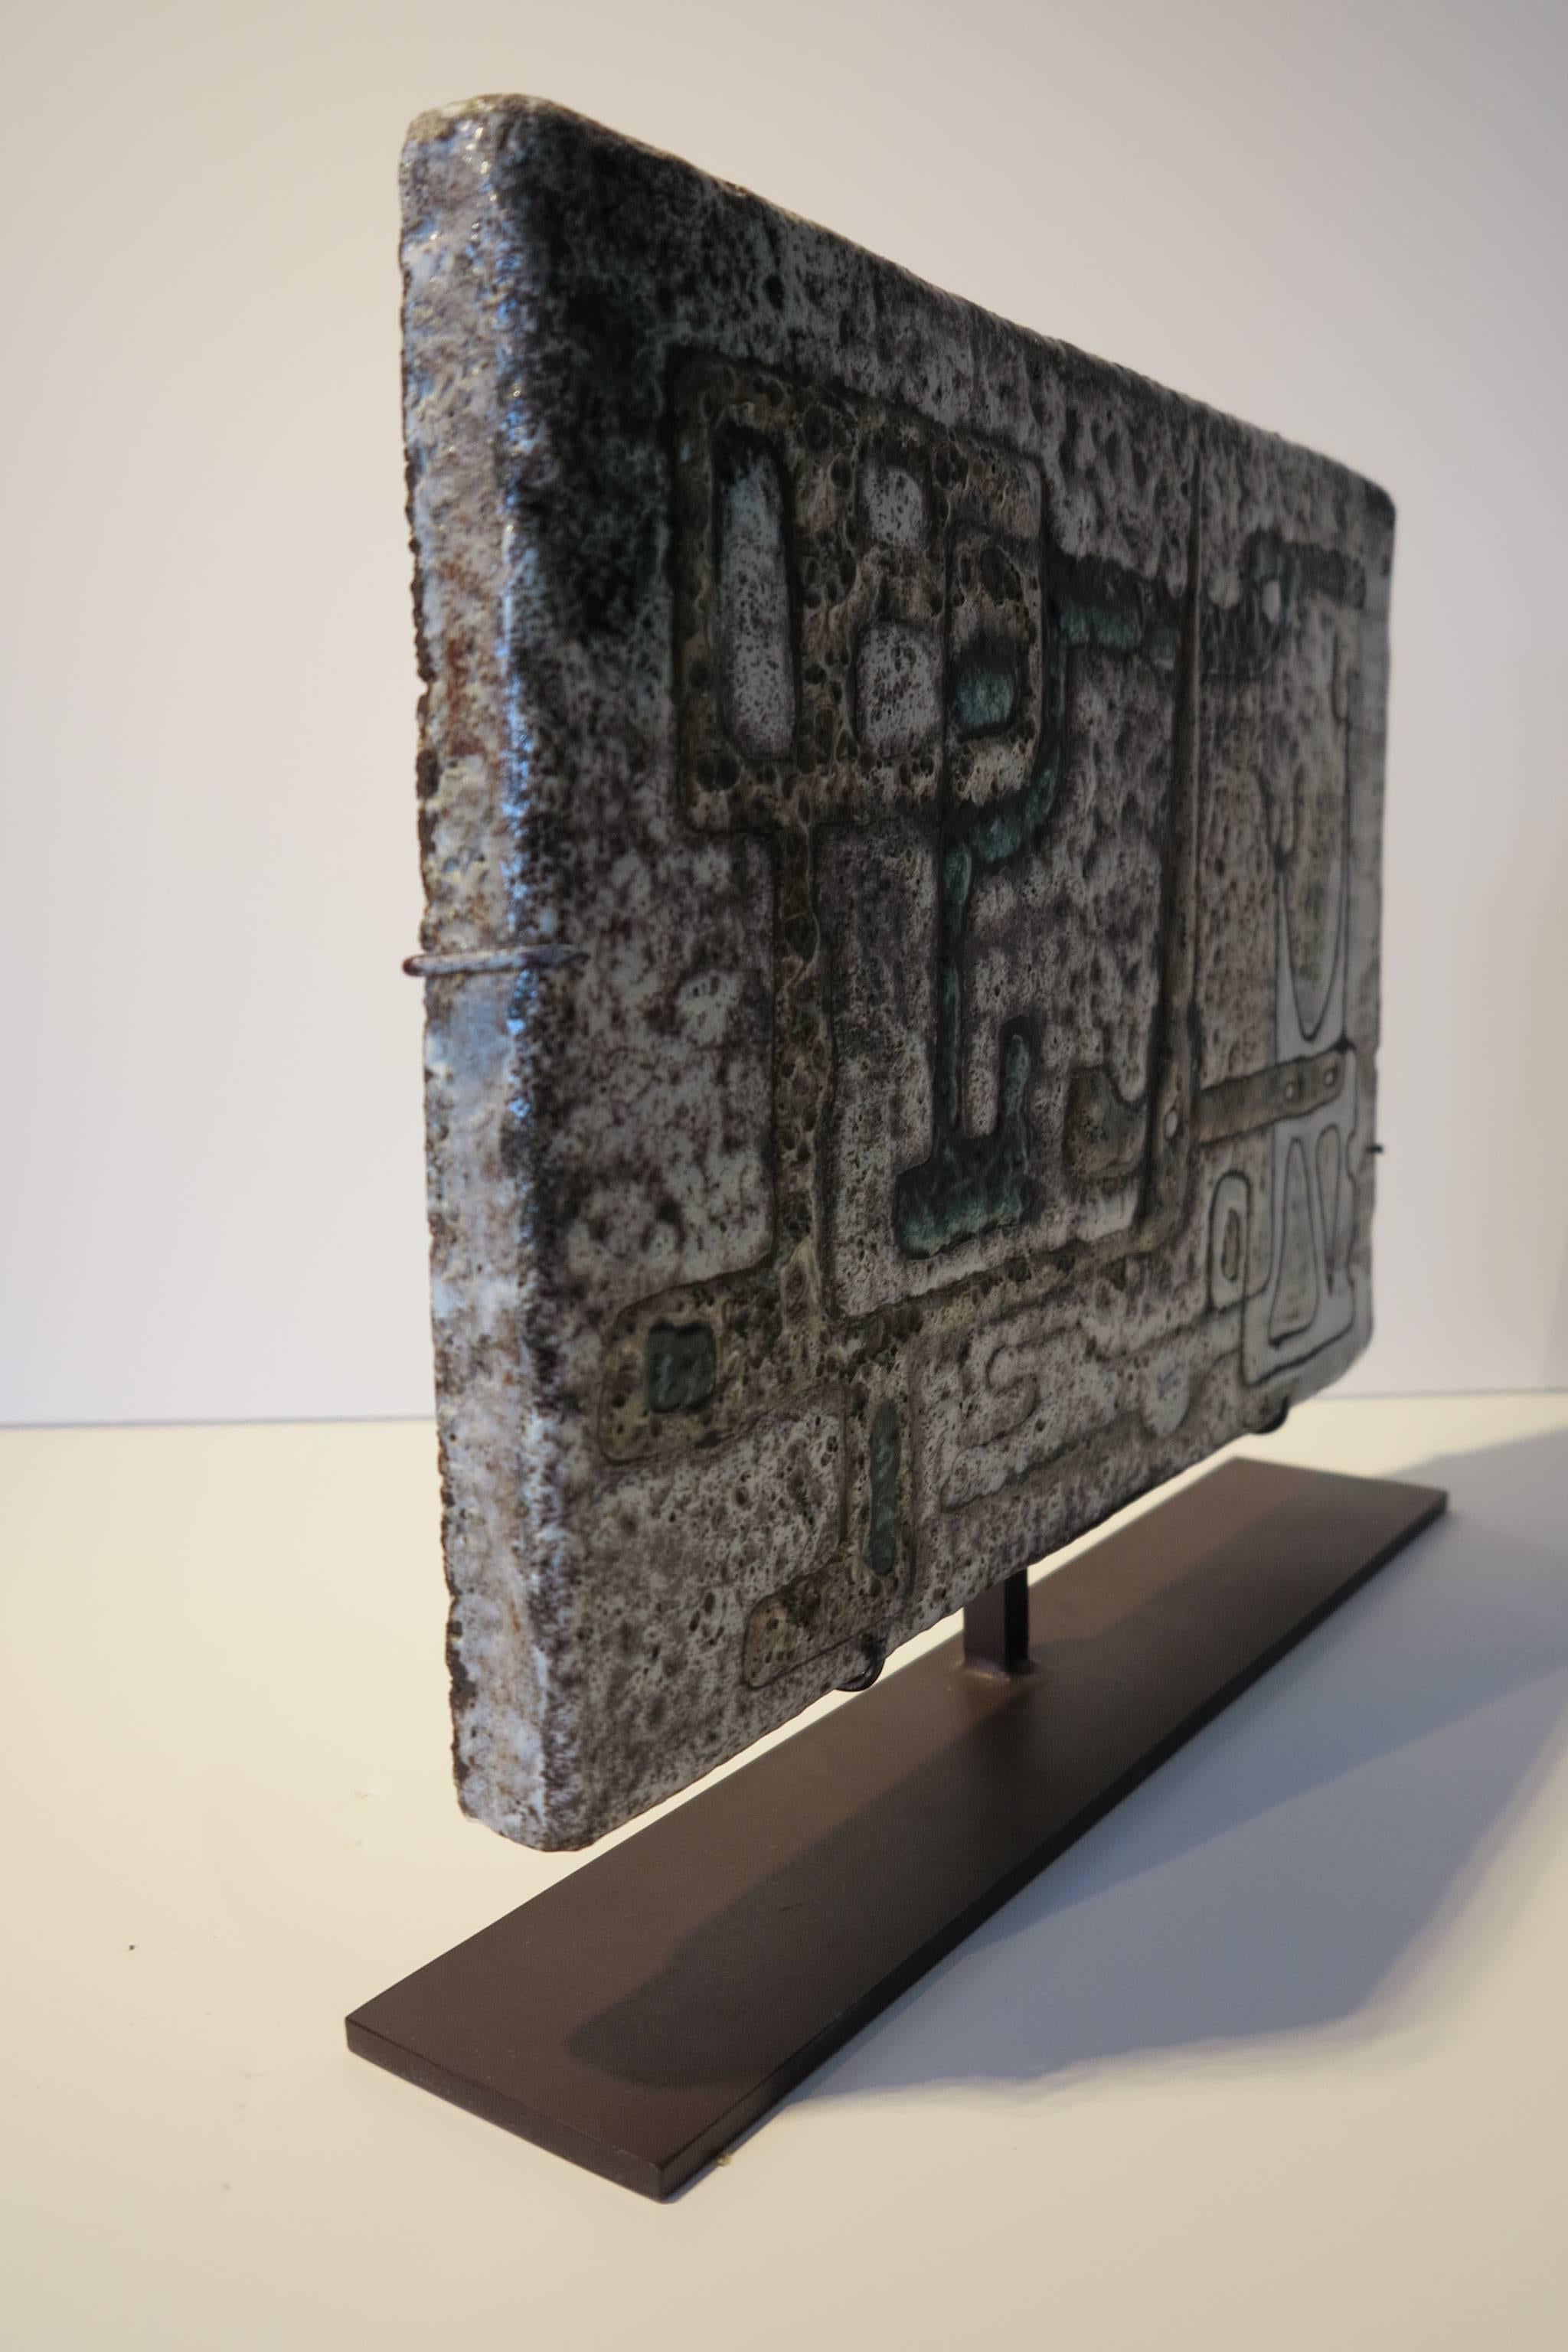 Untitled (Geometric abstract glazed tile sculpture) - Sculpture by Jean Rivier